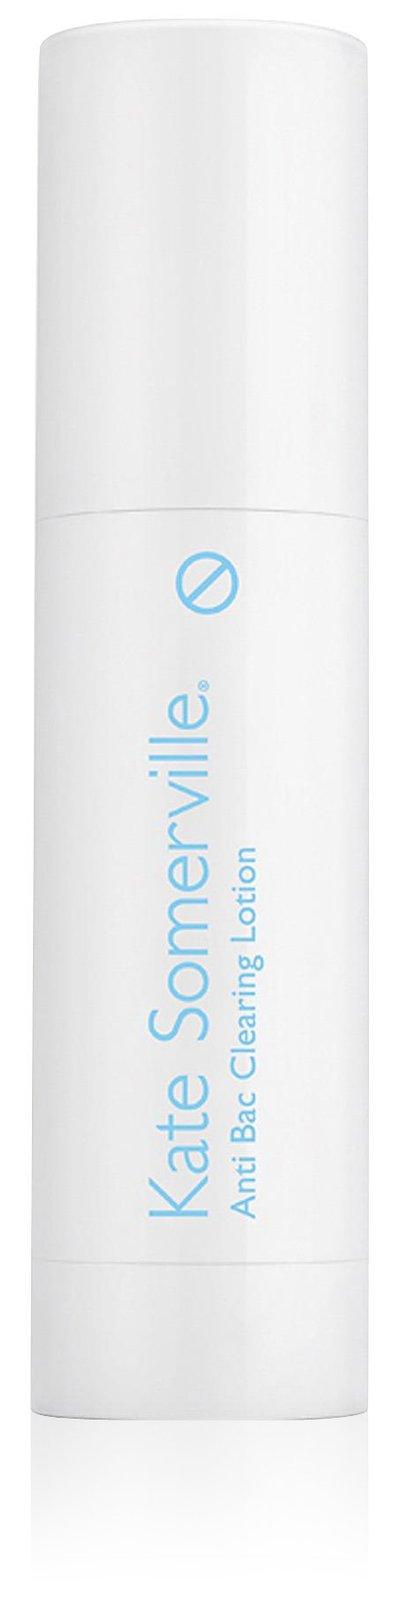 Kate Somerville Anti Bac Clearing Lotion Acne Treatment